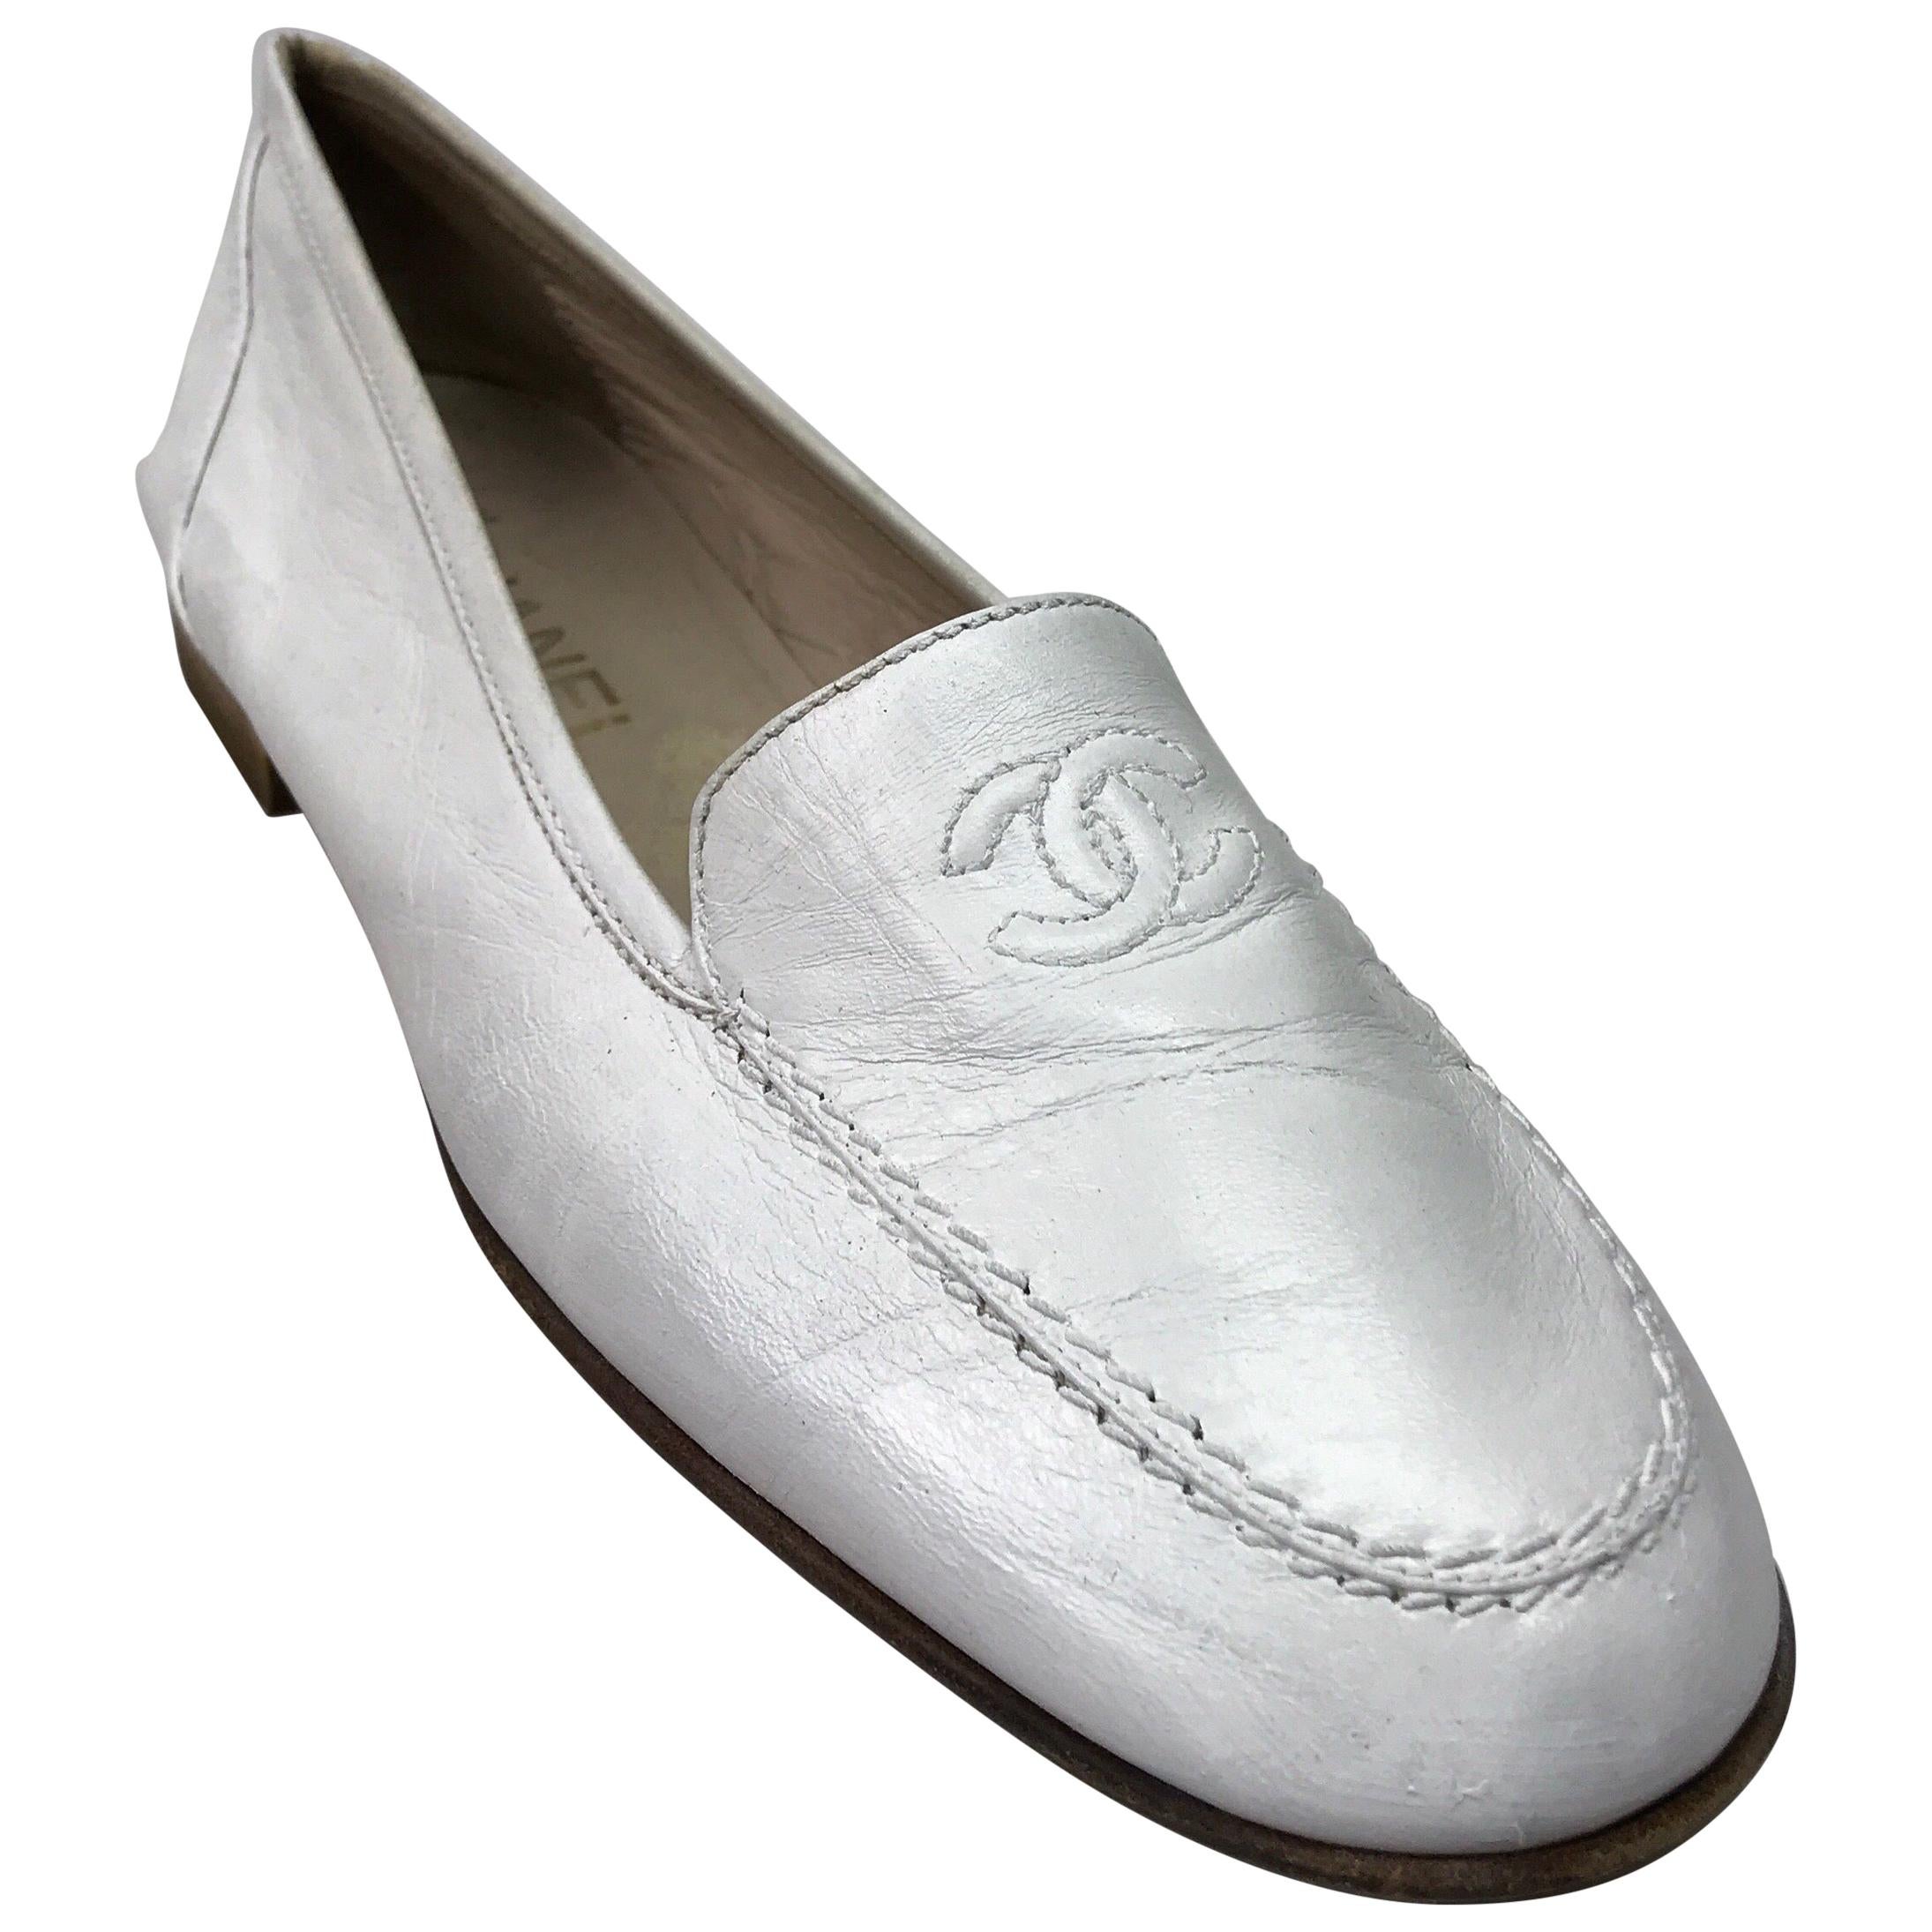 Chanel White Leather Loafers w/ "CC" Stitching-38.5